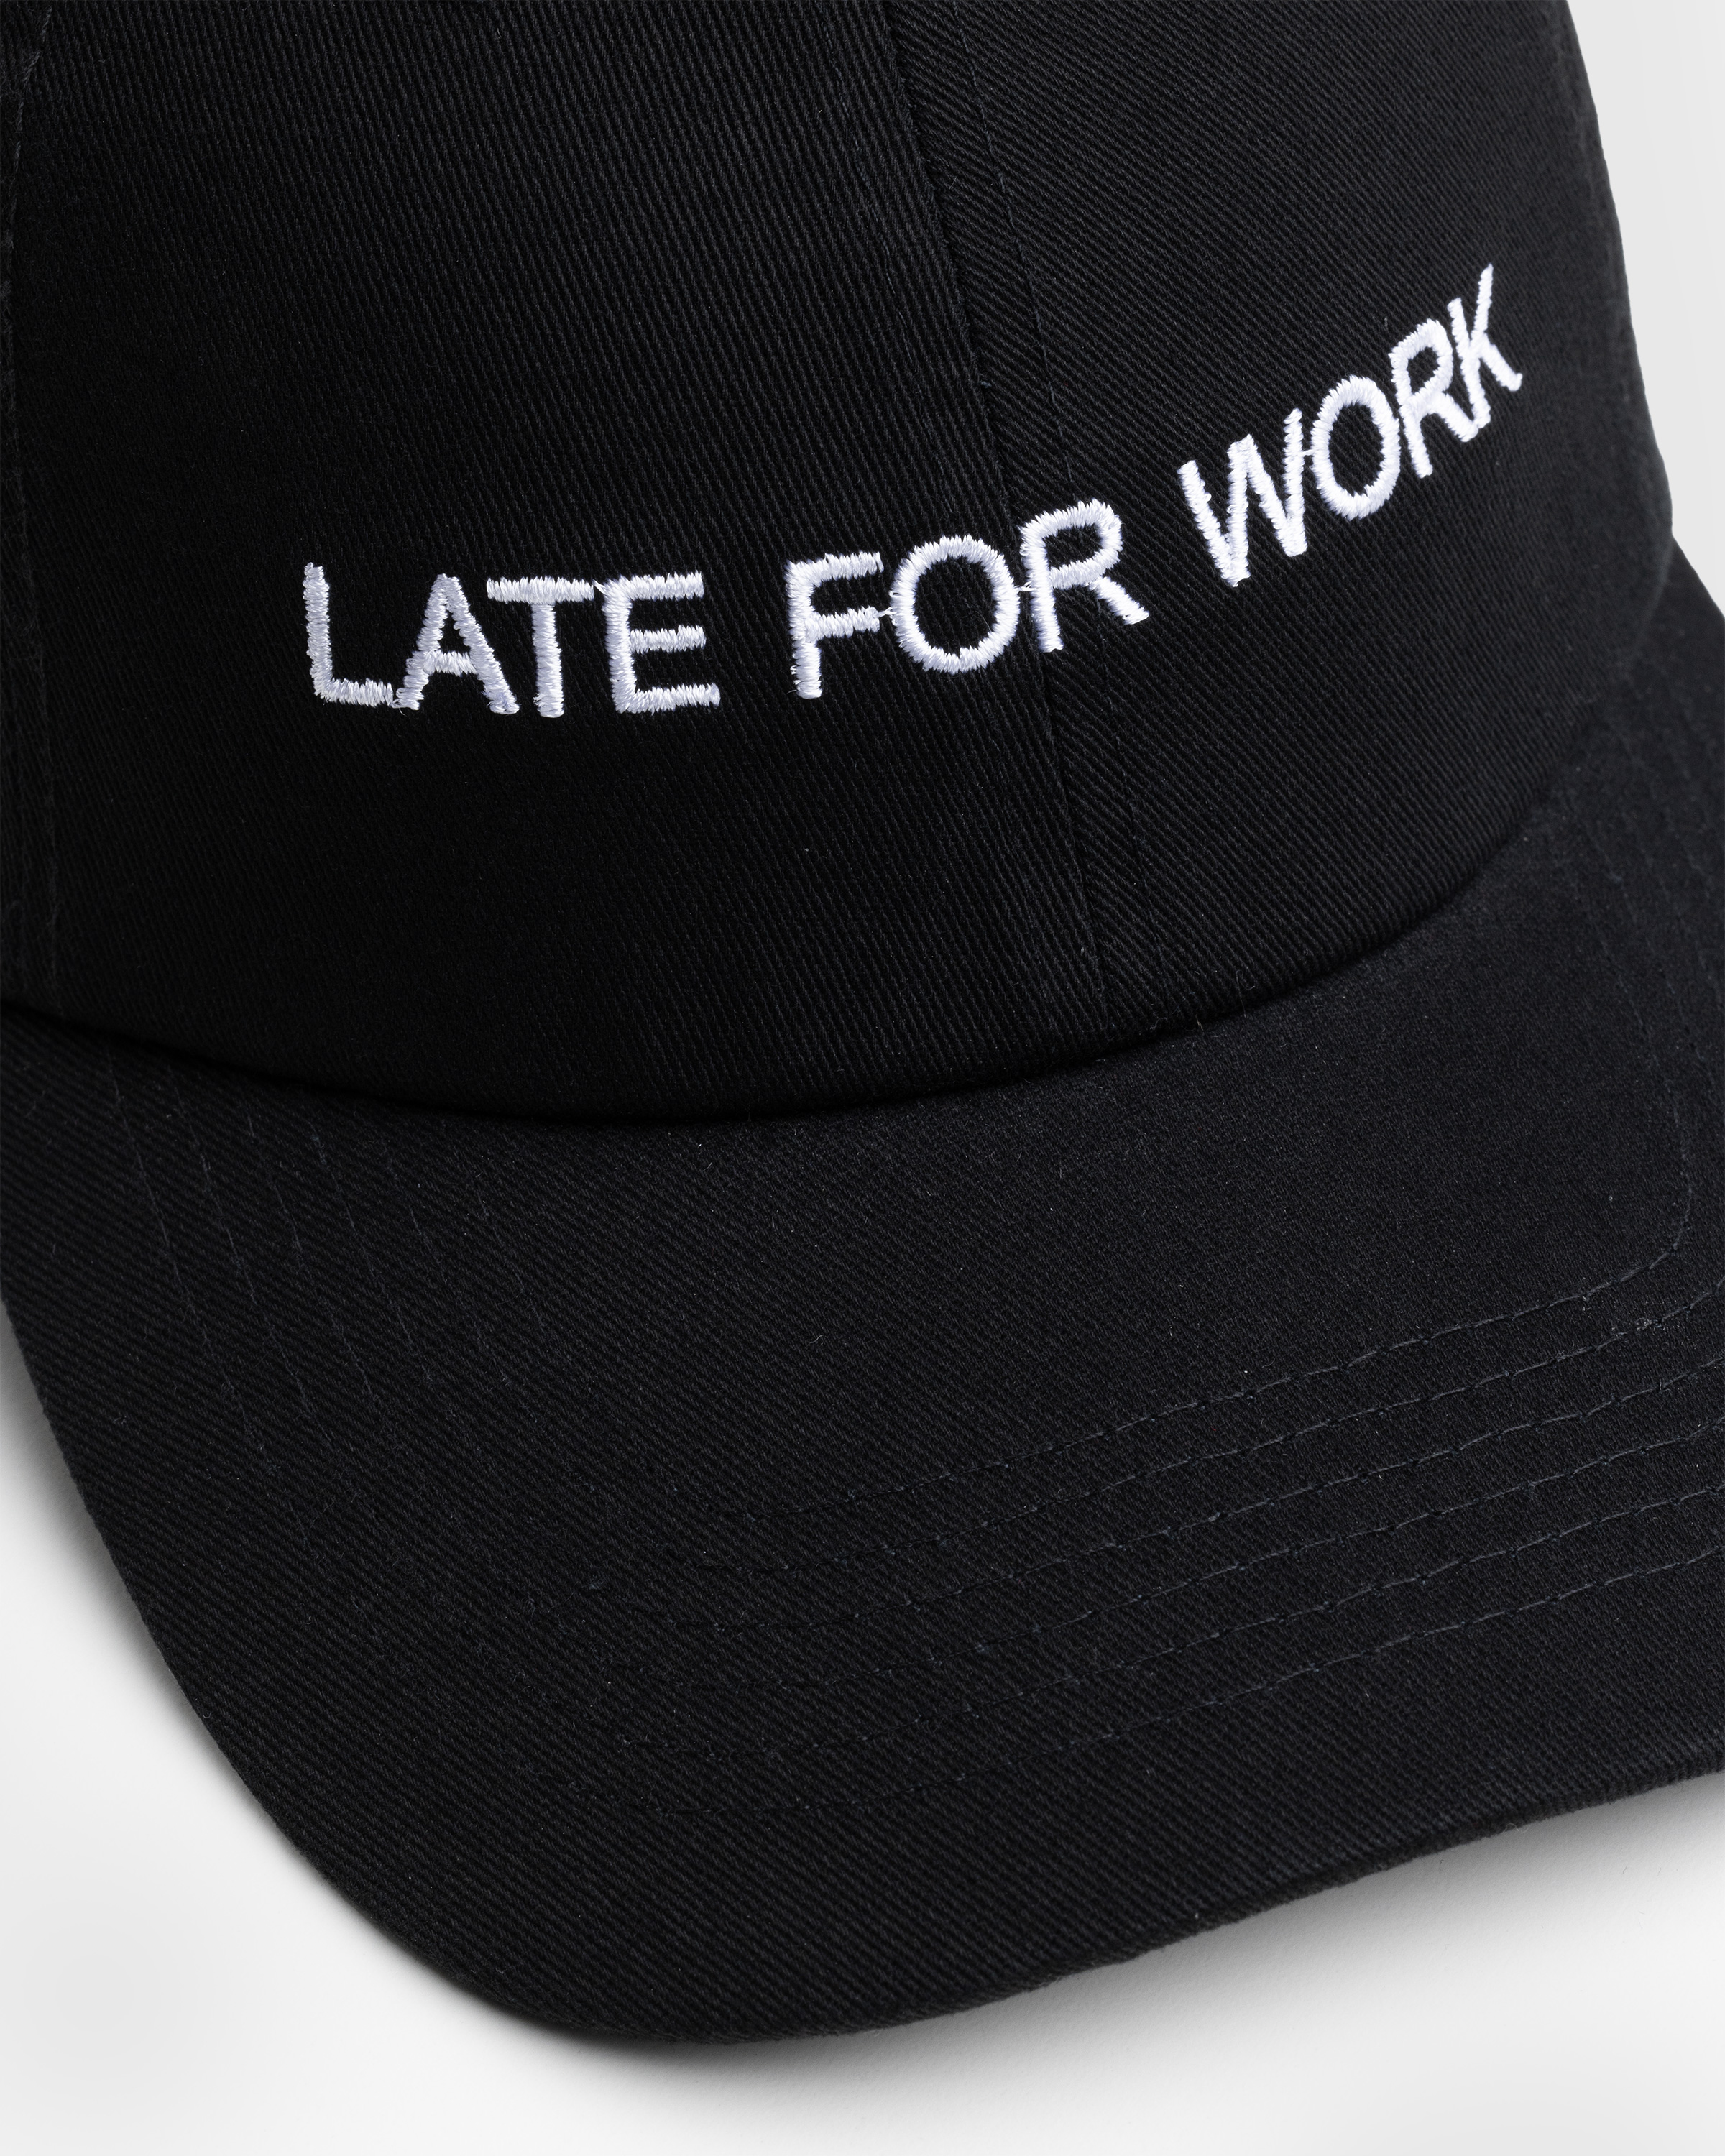 HO HO COCO – Late For Work Hat Black/White - Caps - Black - Image 6